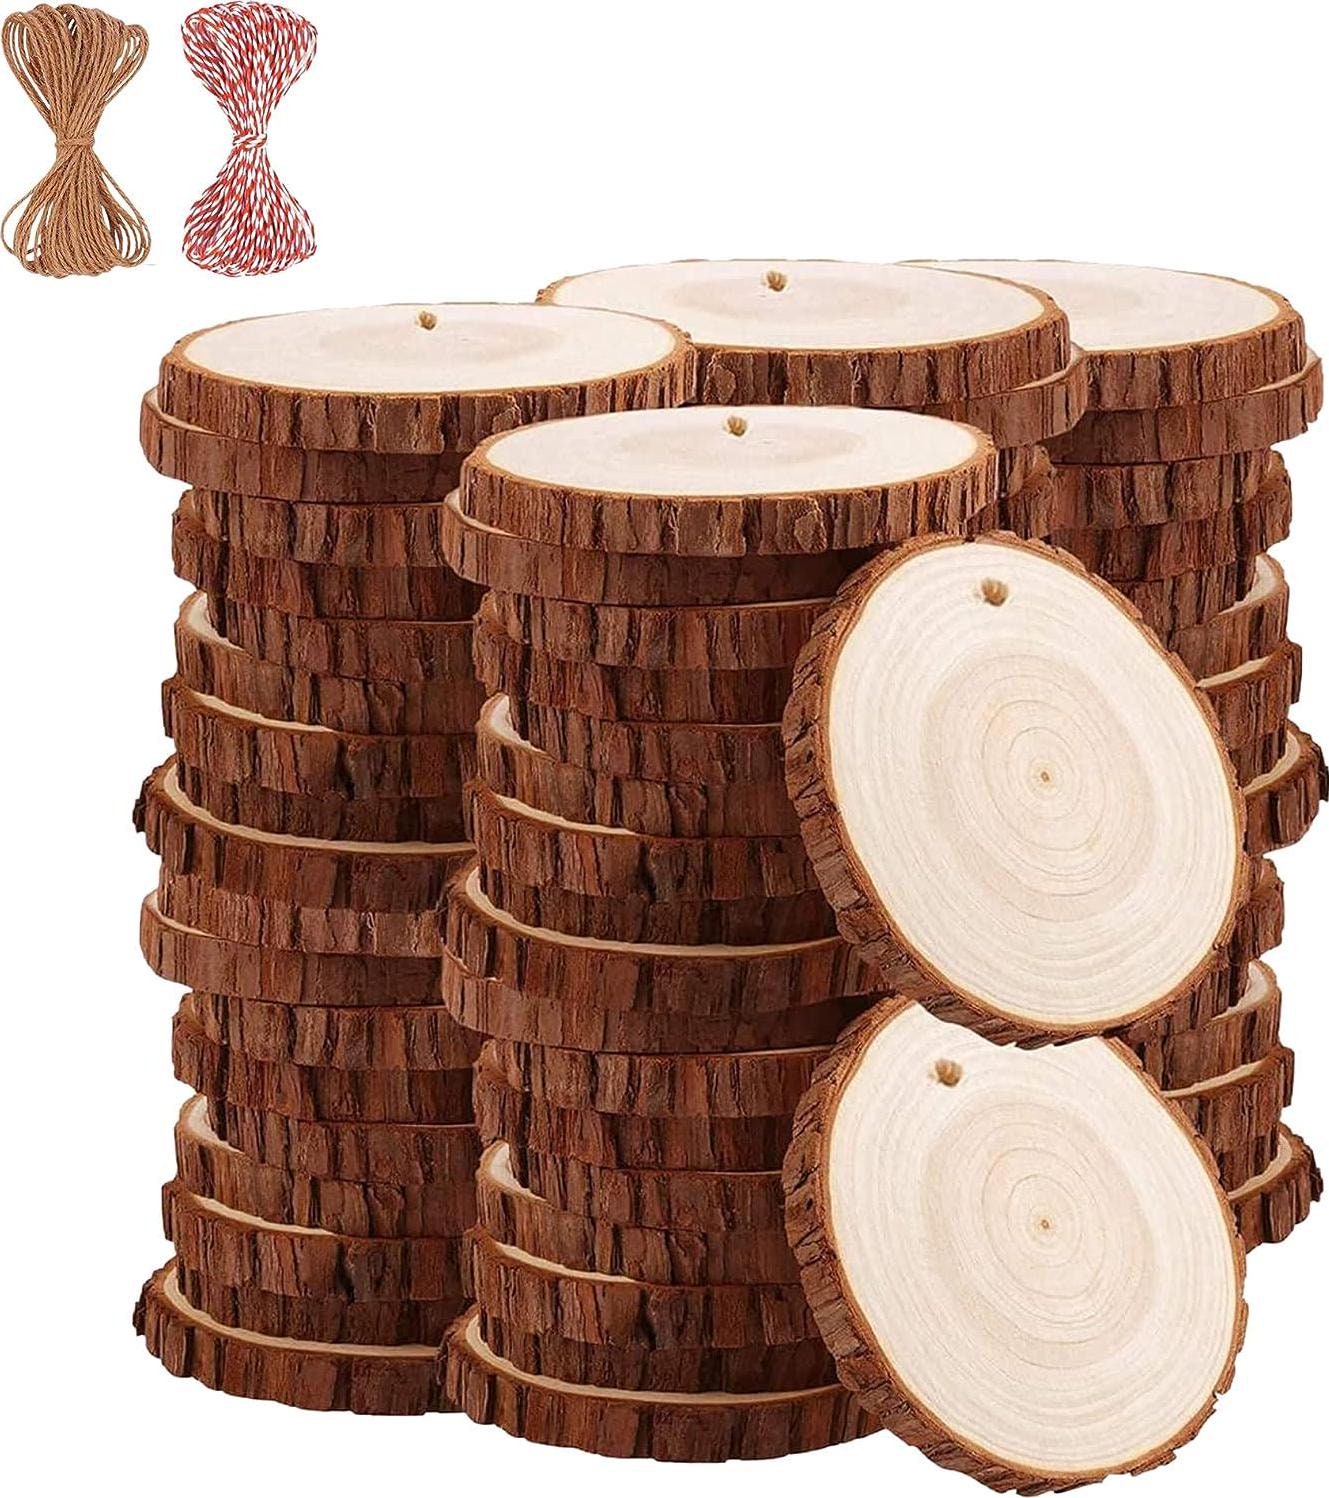 Natural Wood Slices TICIOSH 50 Pcs 2.4-2.8 Inches Craft Unfinished Wood Kit Predrilled with Hole Wooden Circles for DIY Crafts Wedding Decorations